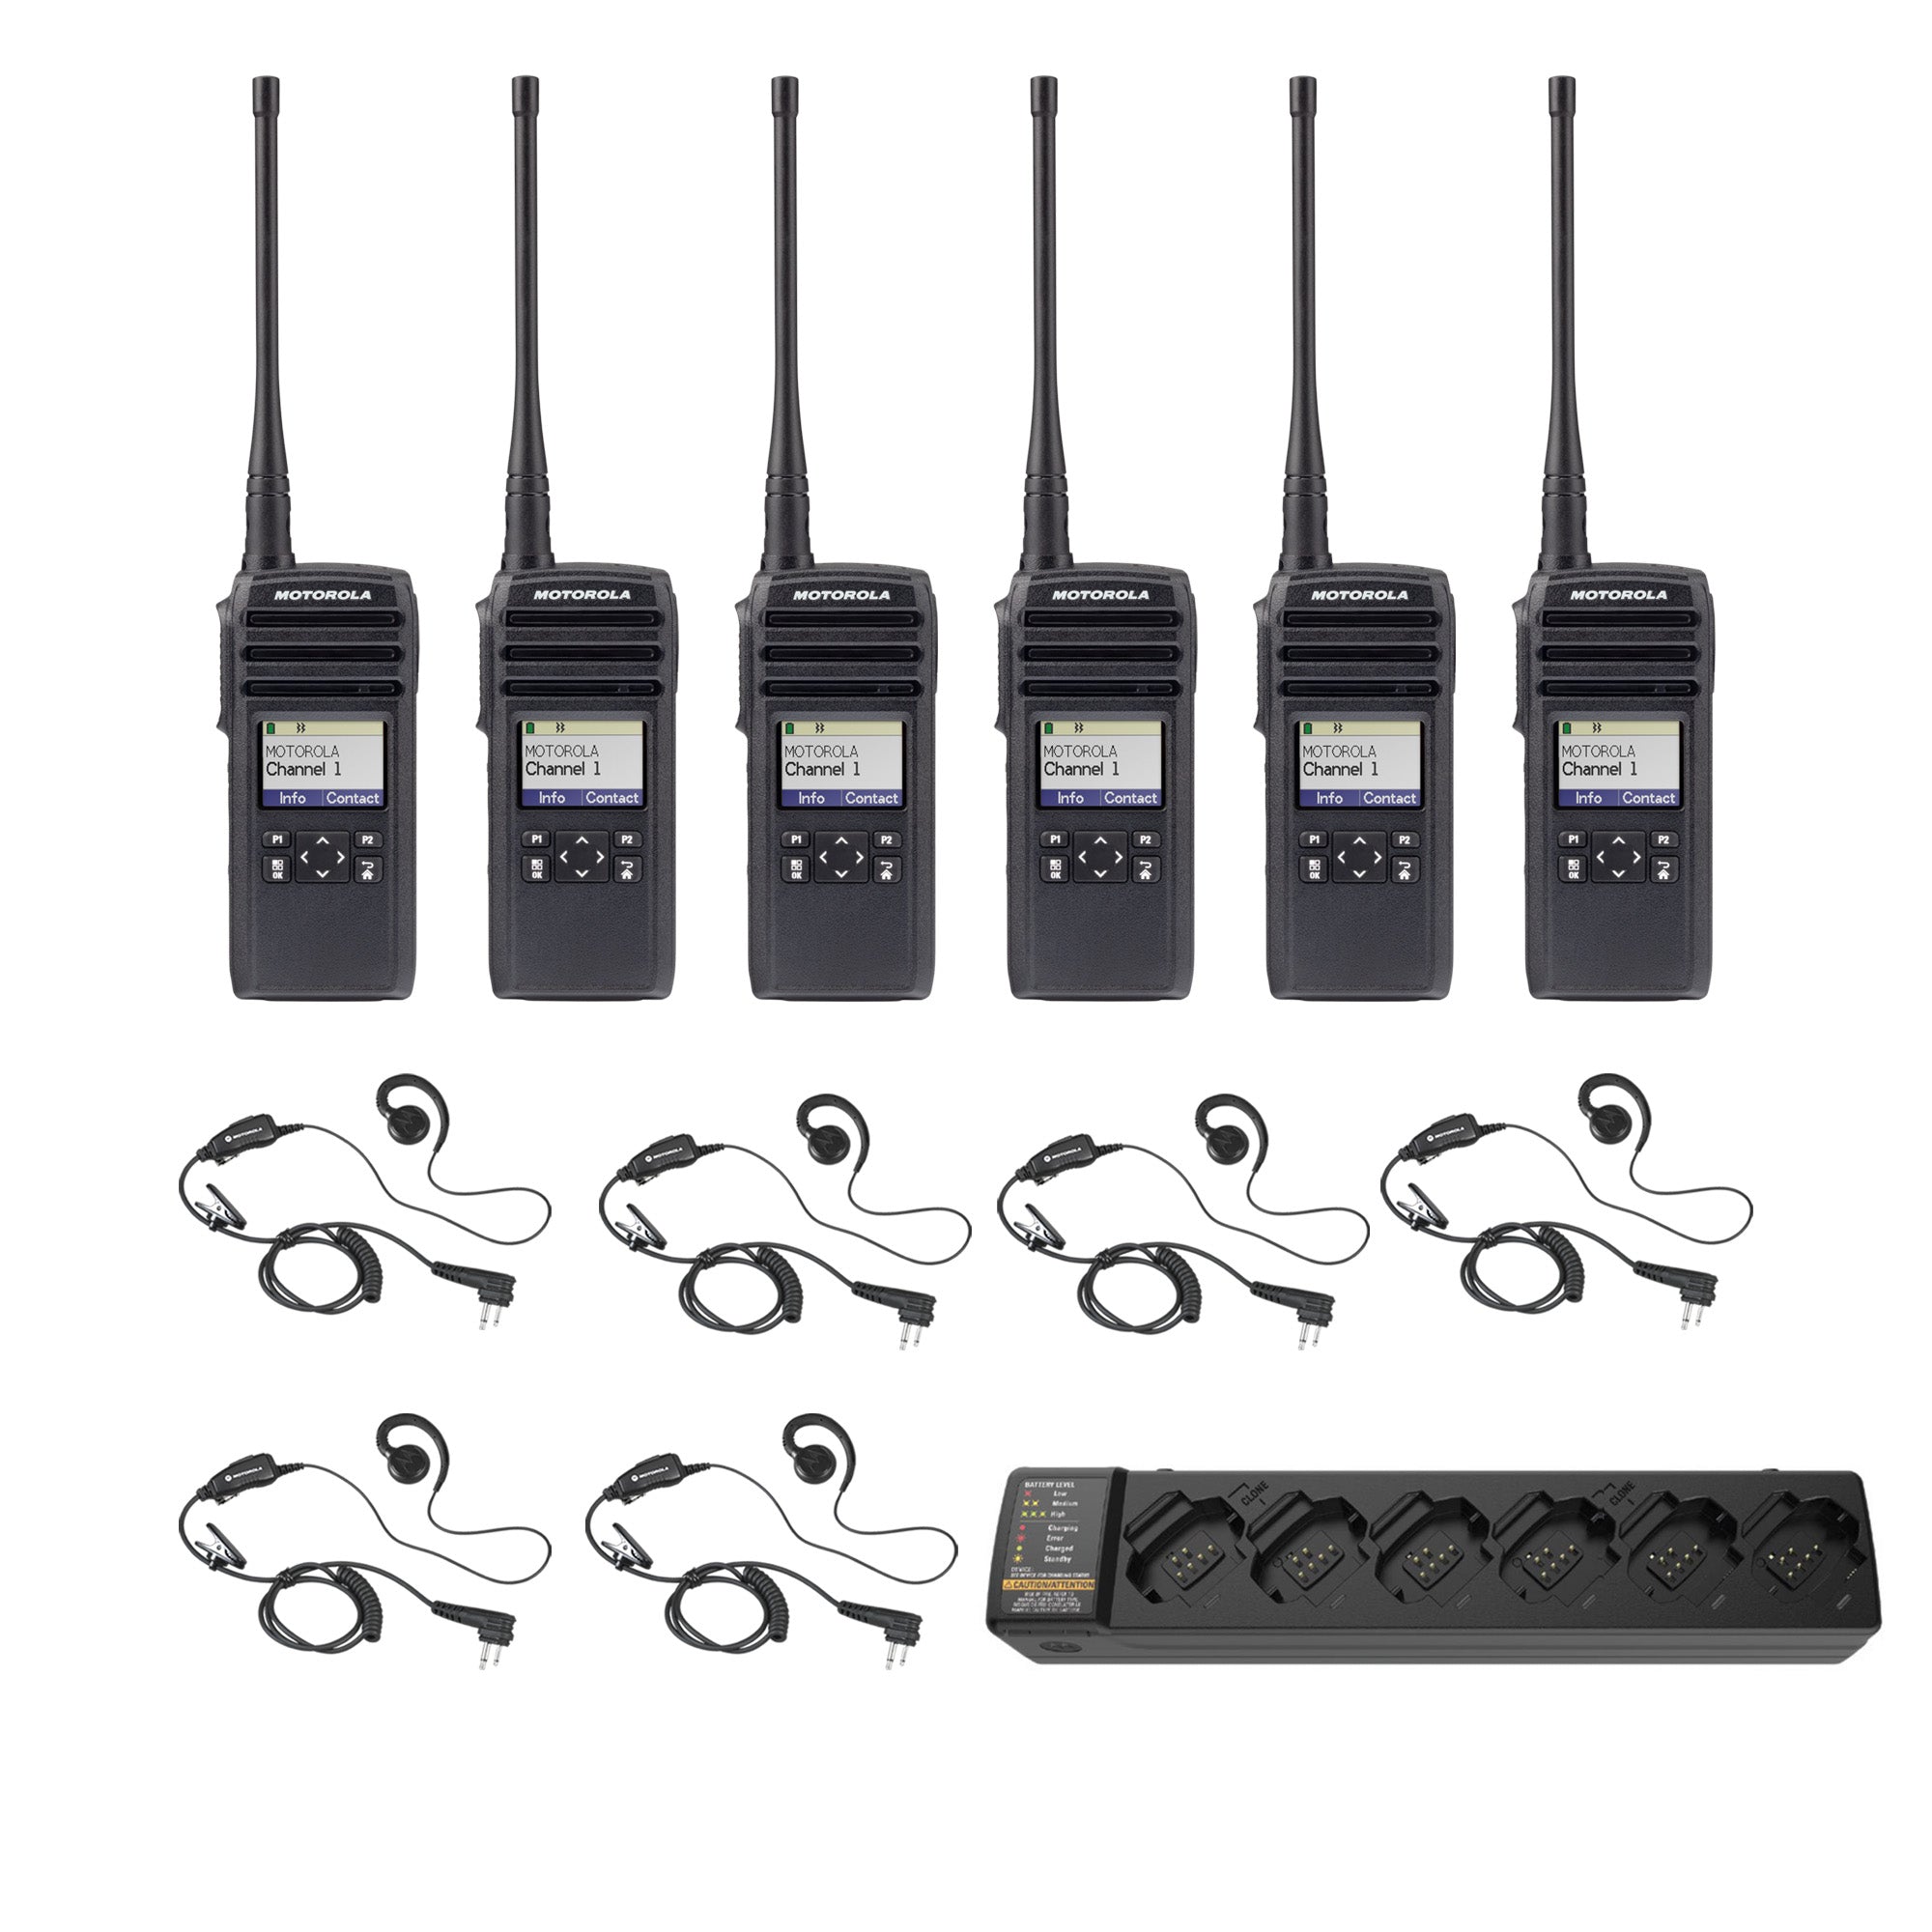 DTR700 Pack with Multi Unit Charger and Headsets